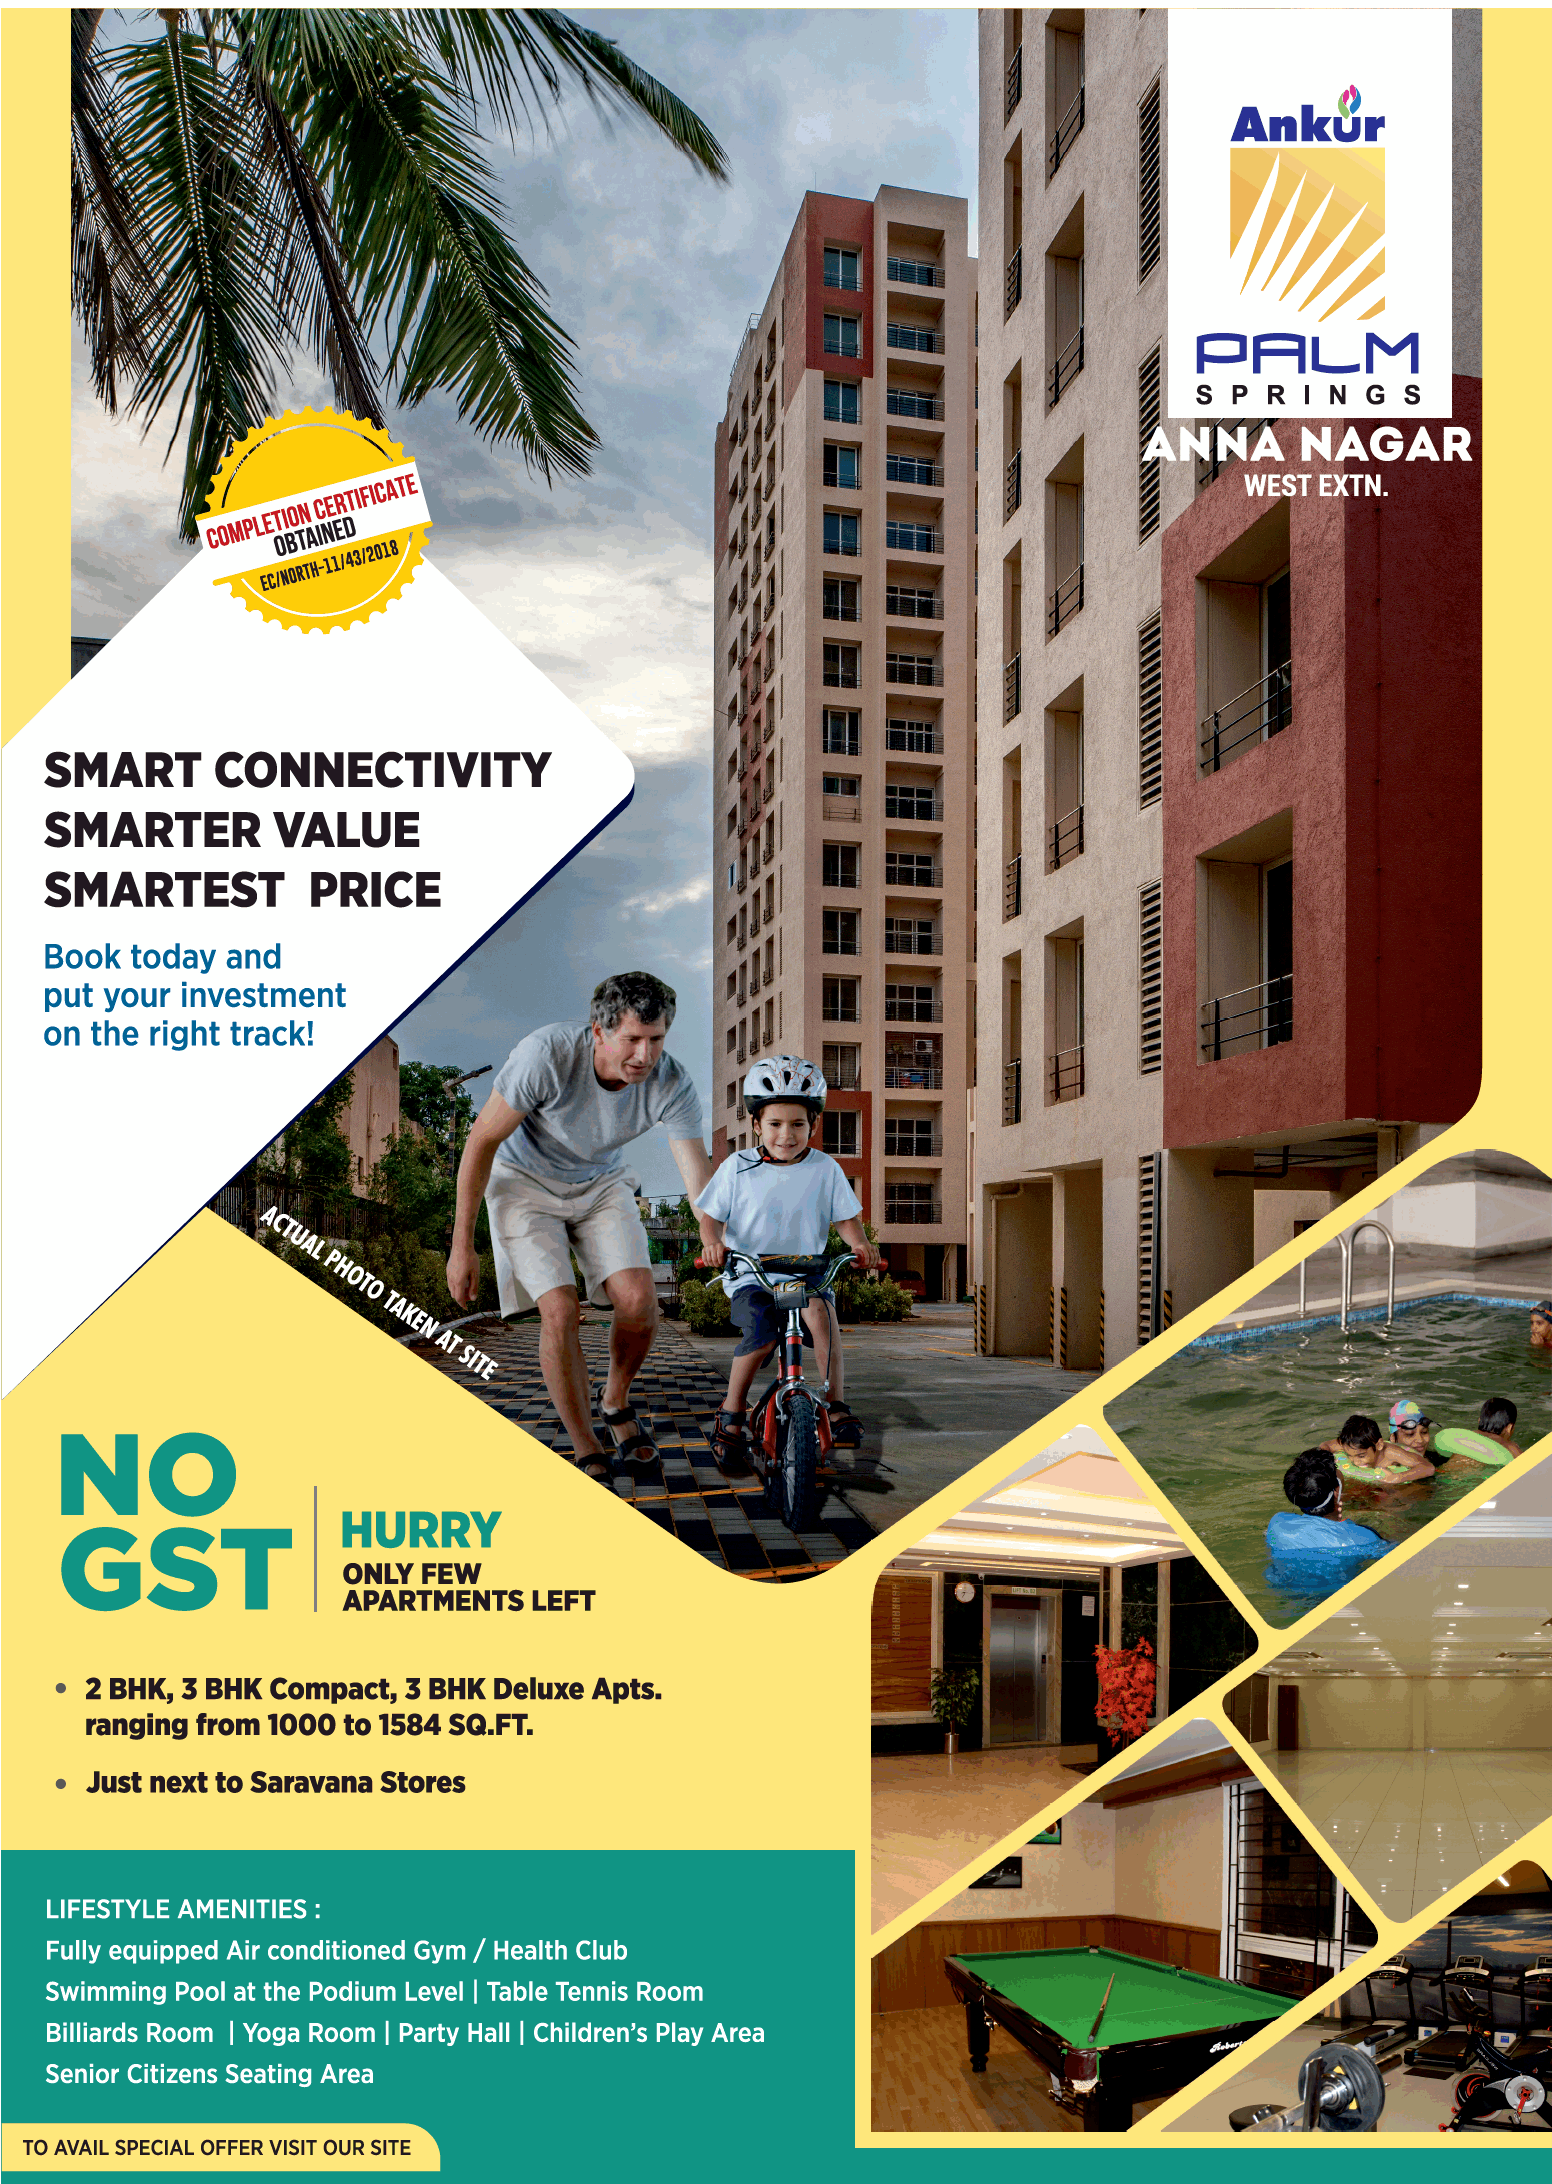 Book today an apartment and put your investment on the right track at Ankur Palm Spring, Chennai Update